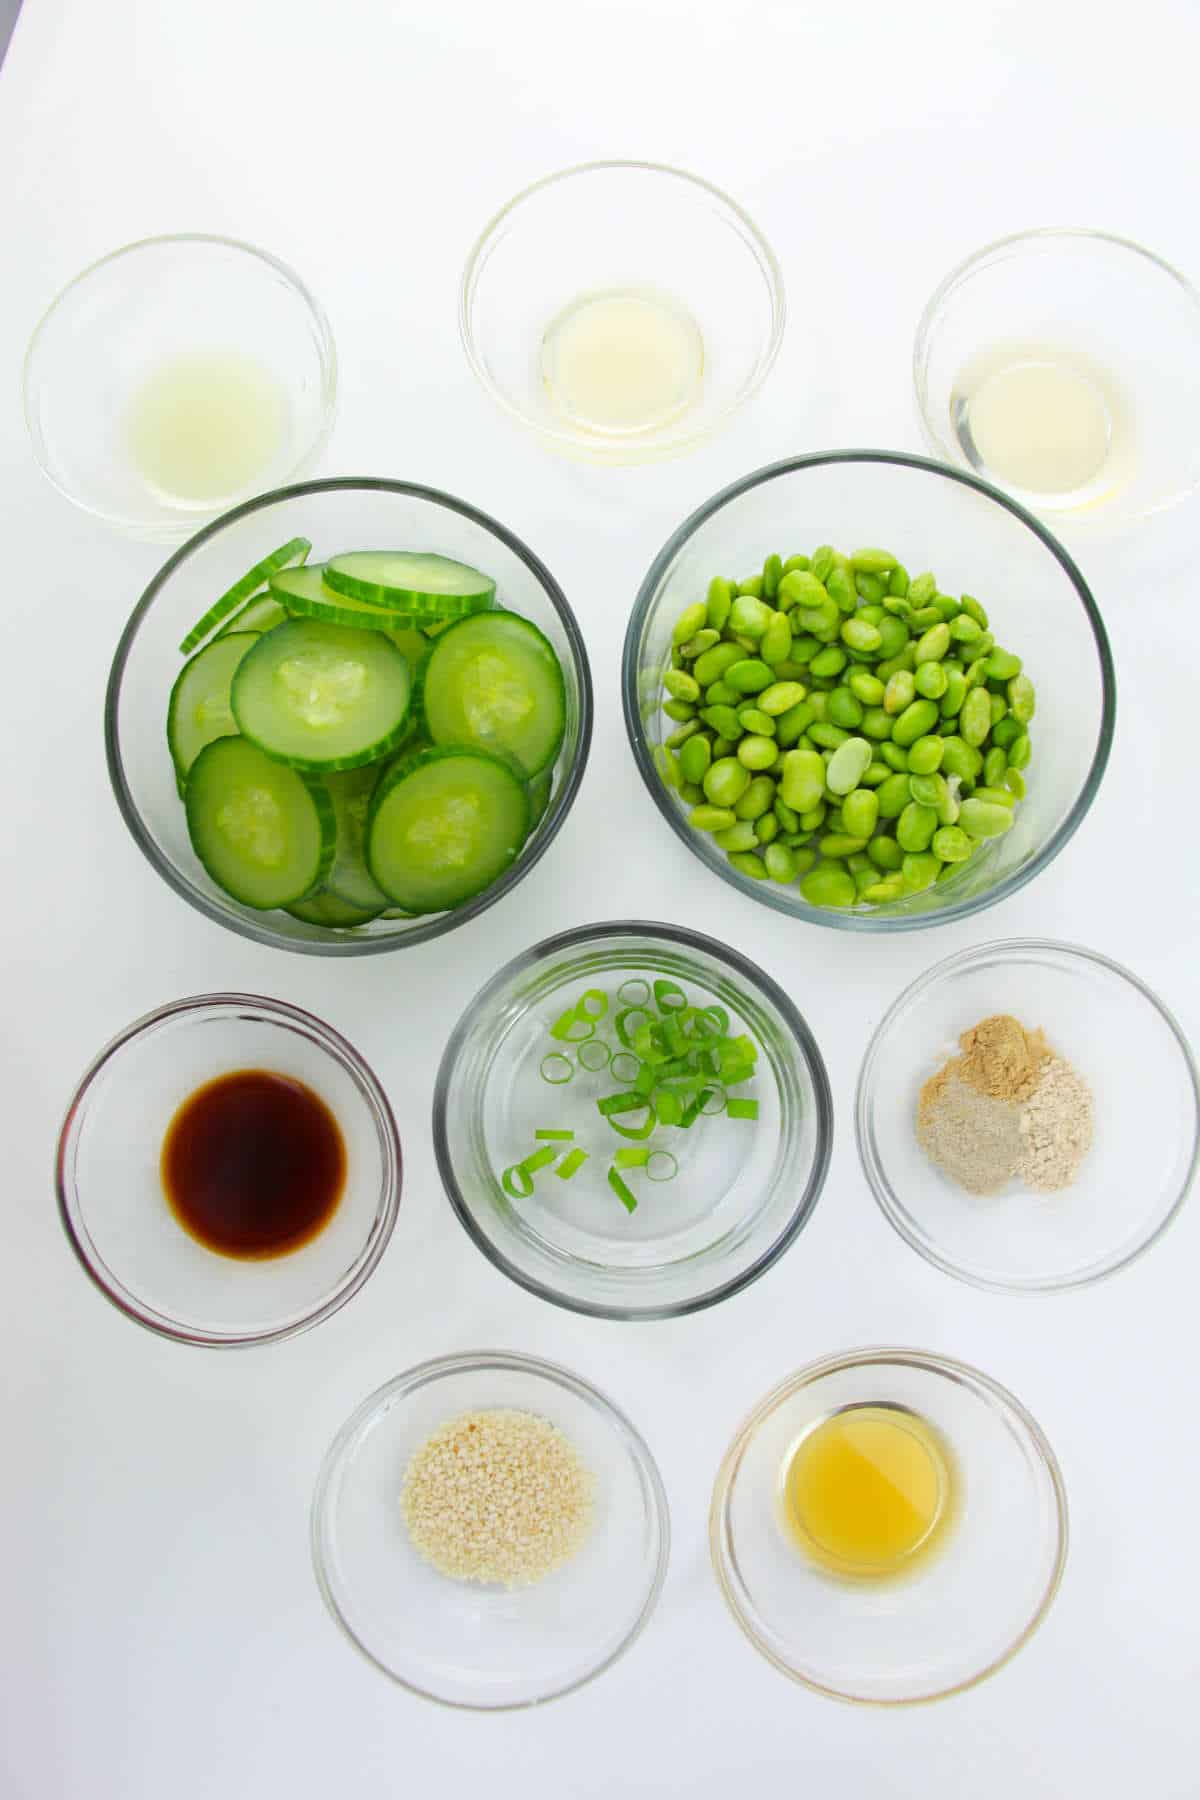 ingredients for making cucumber and edamame salad.